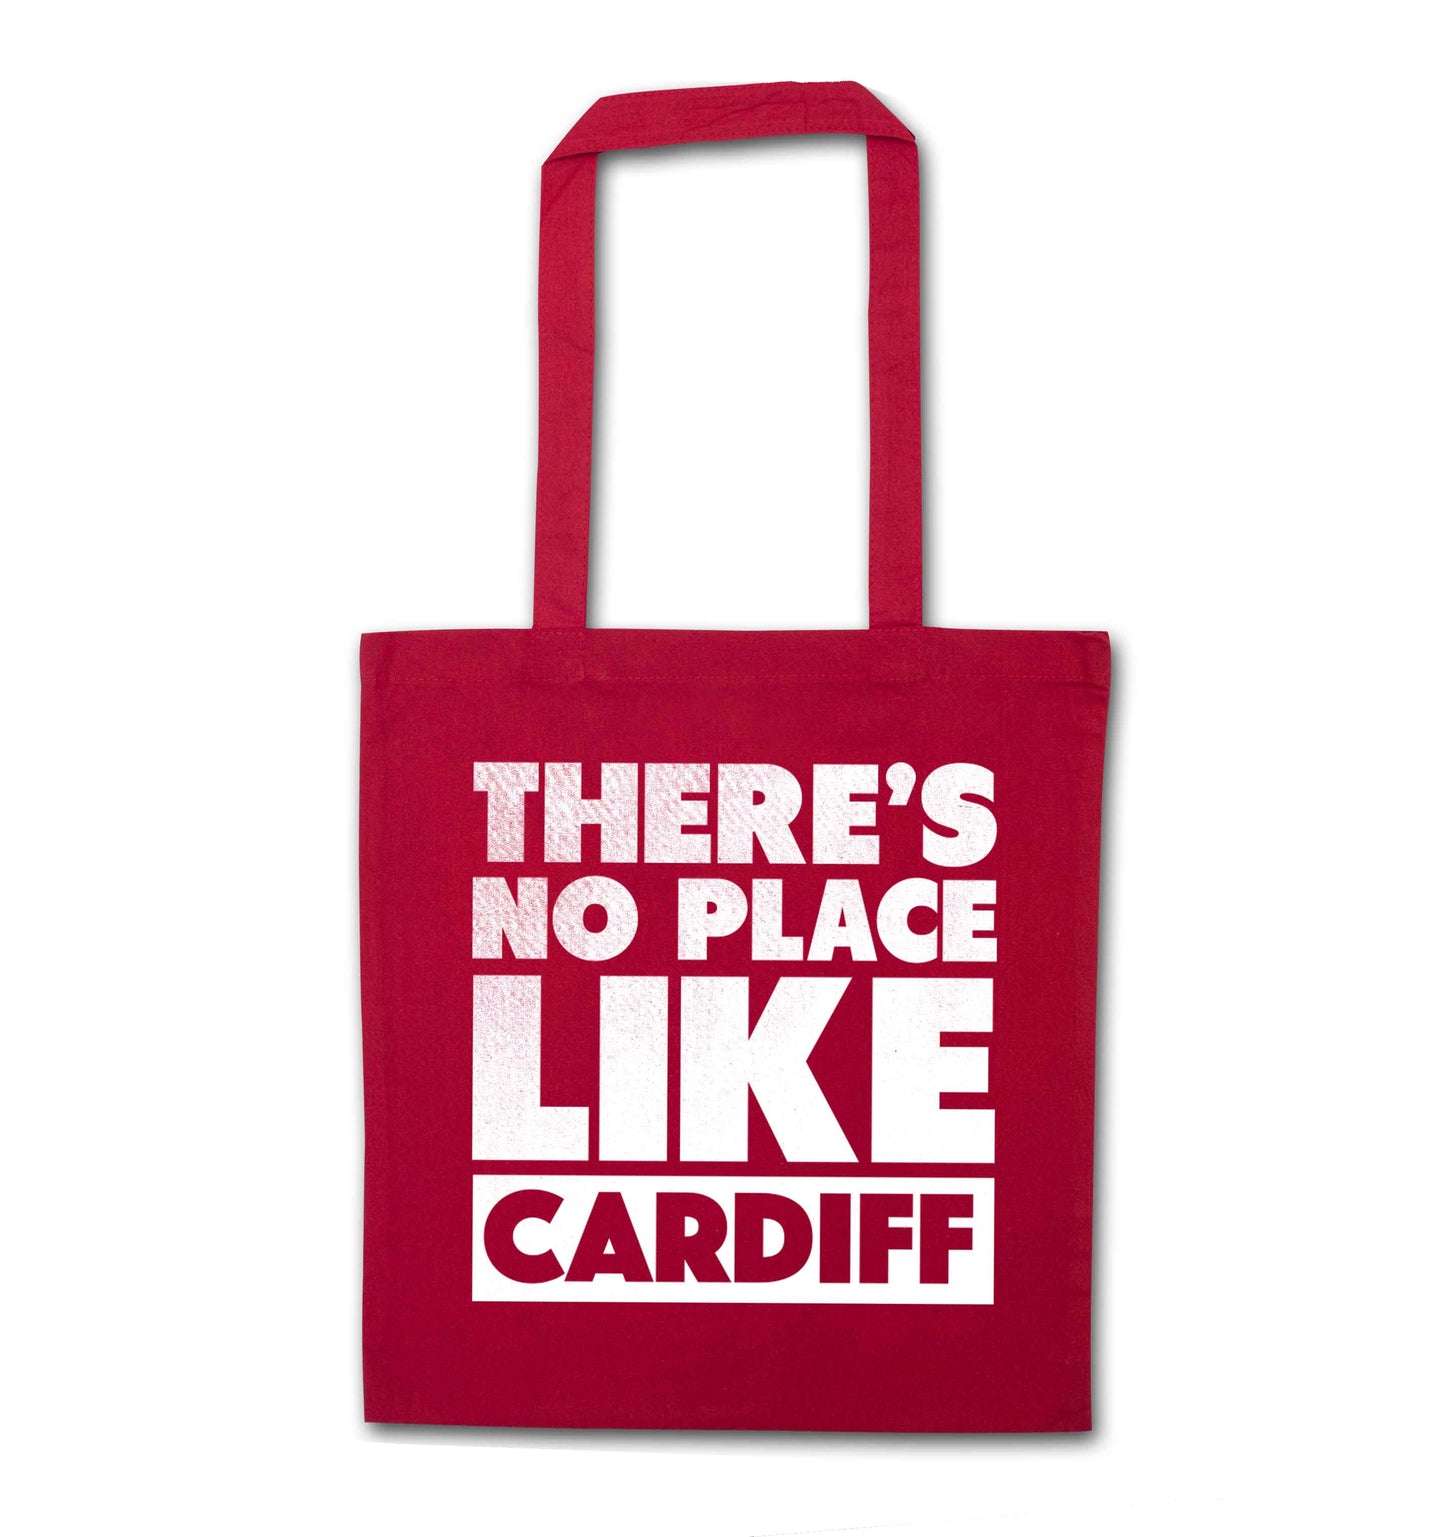 There's no place like Cardiff red tote bag